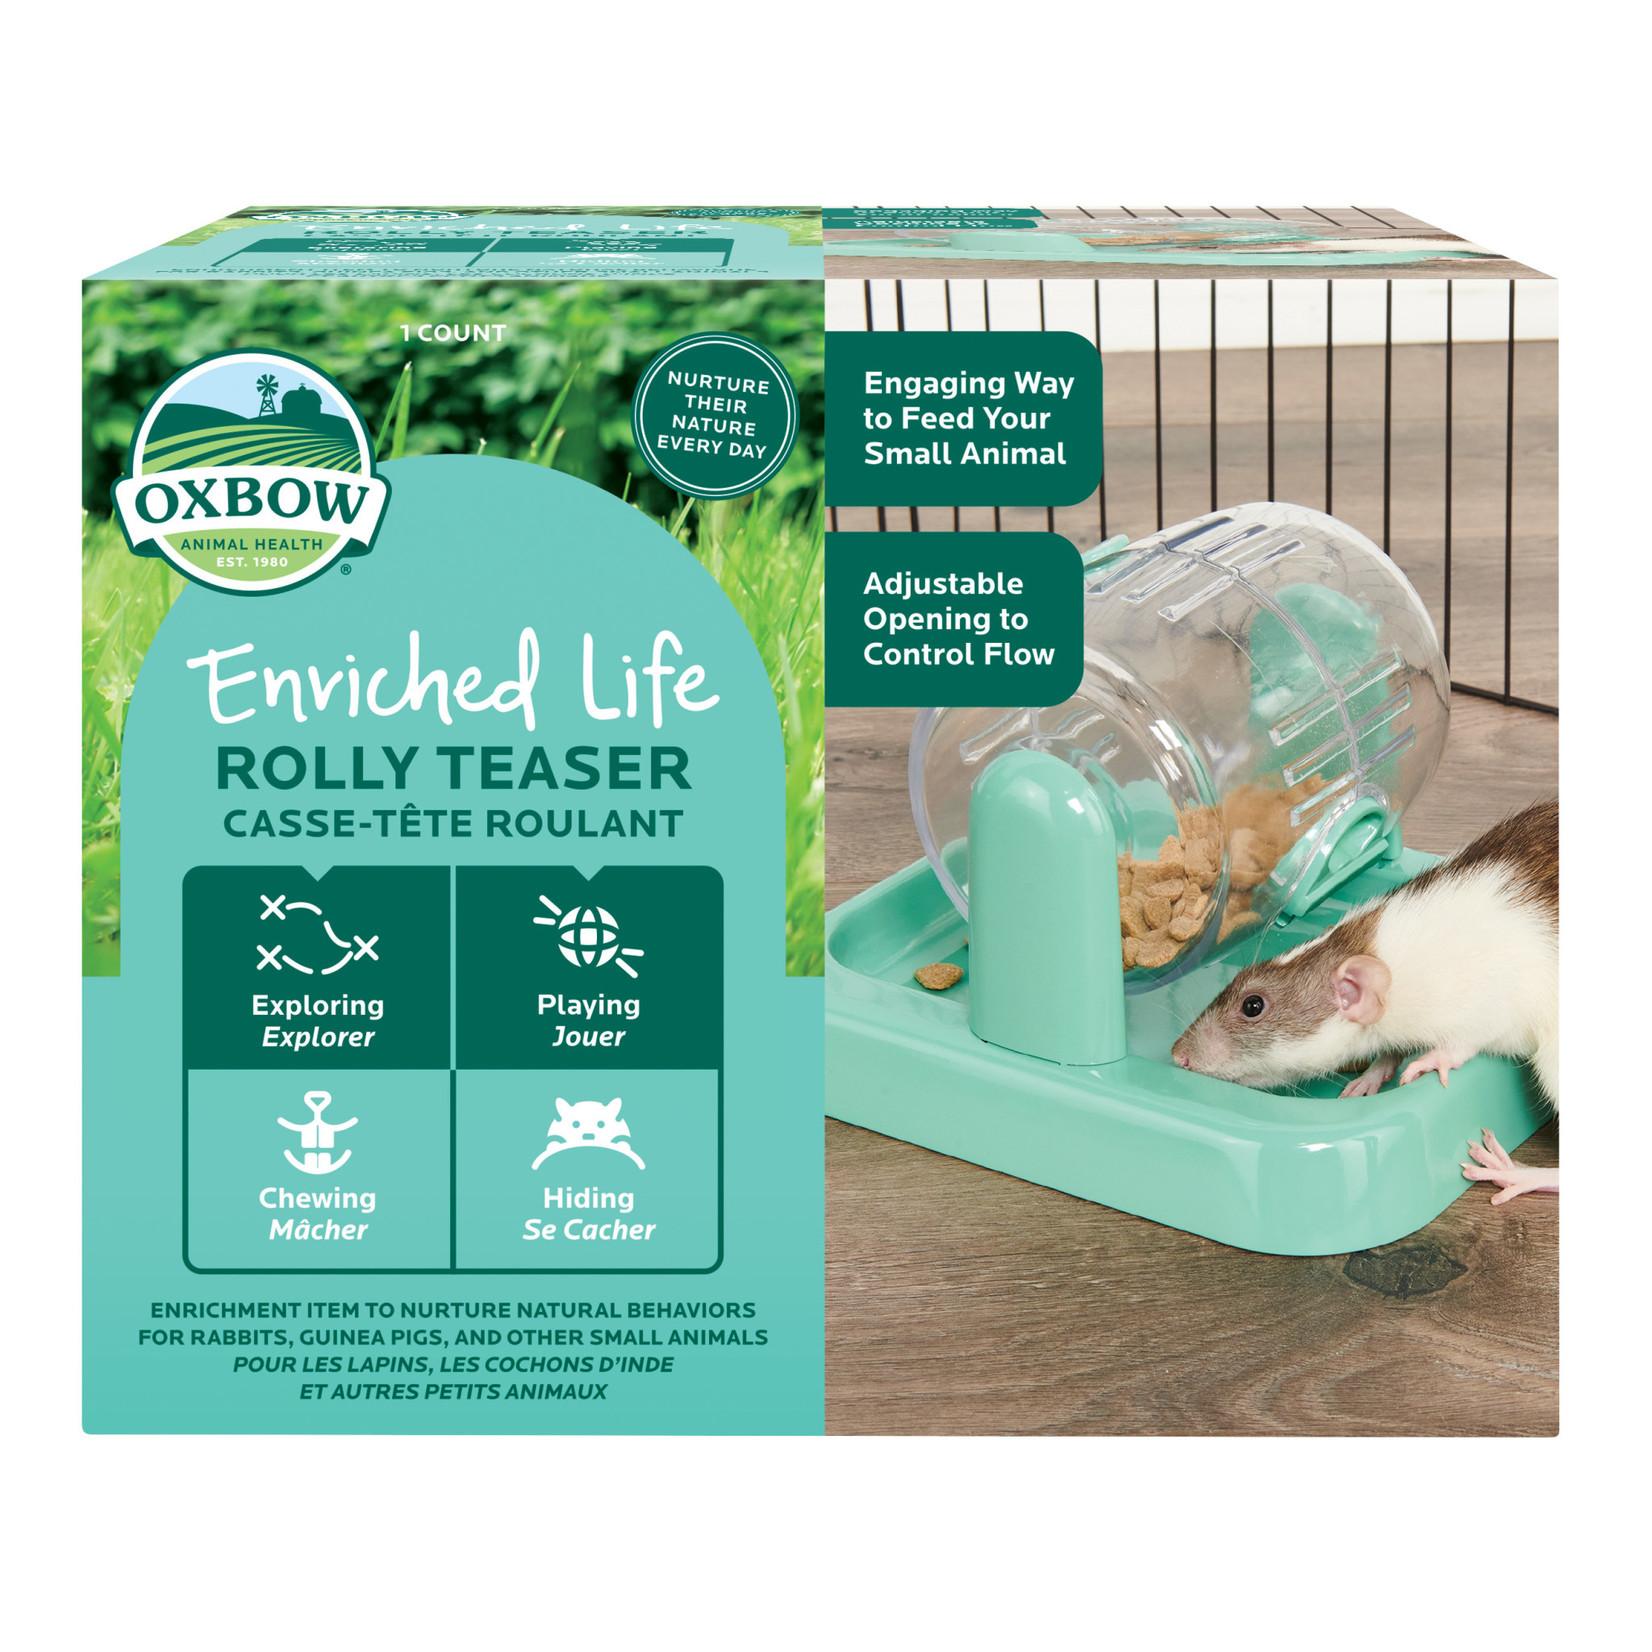 OXBOW ANIMAL HEALTH OXBOW Enriched Life Rolly Teaser